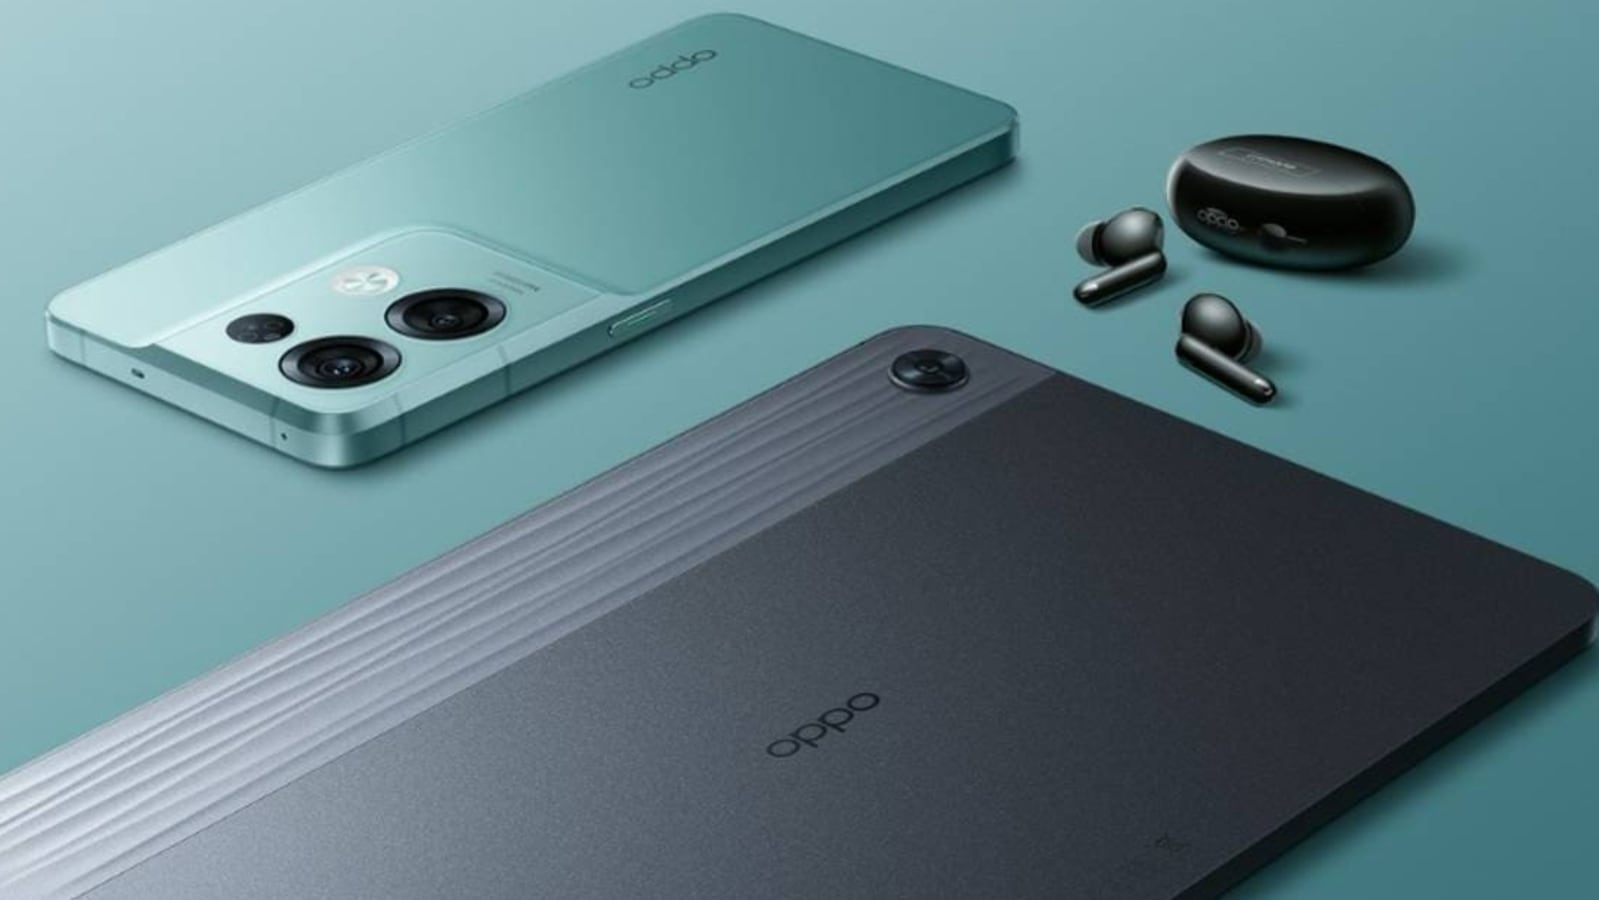 OPPO unveils its first Android tablet with high-end specs from last year